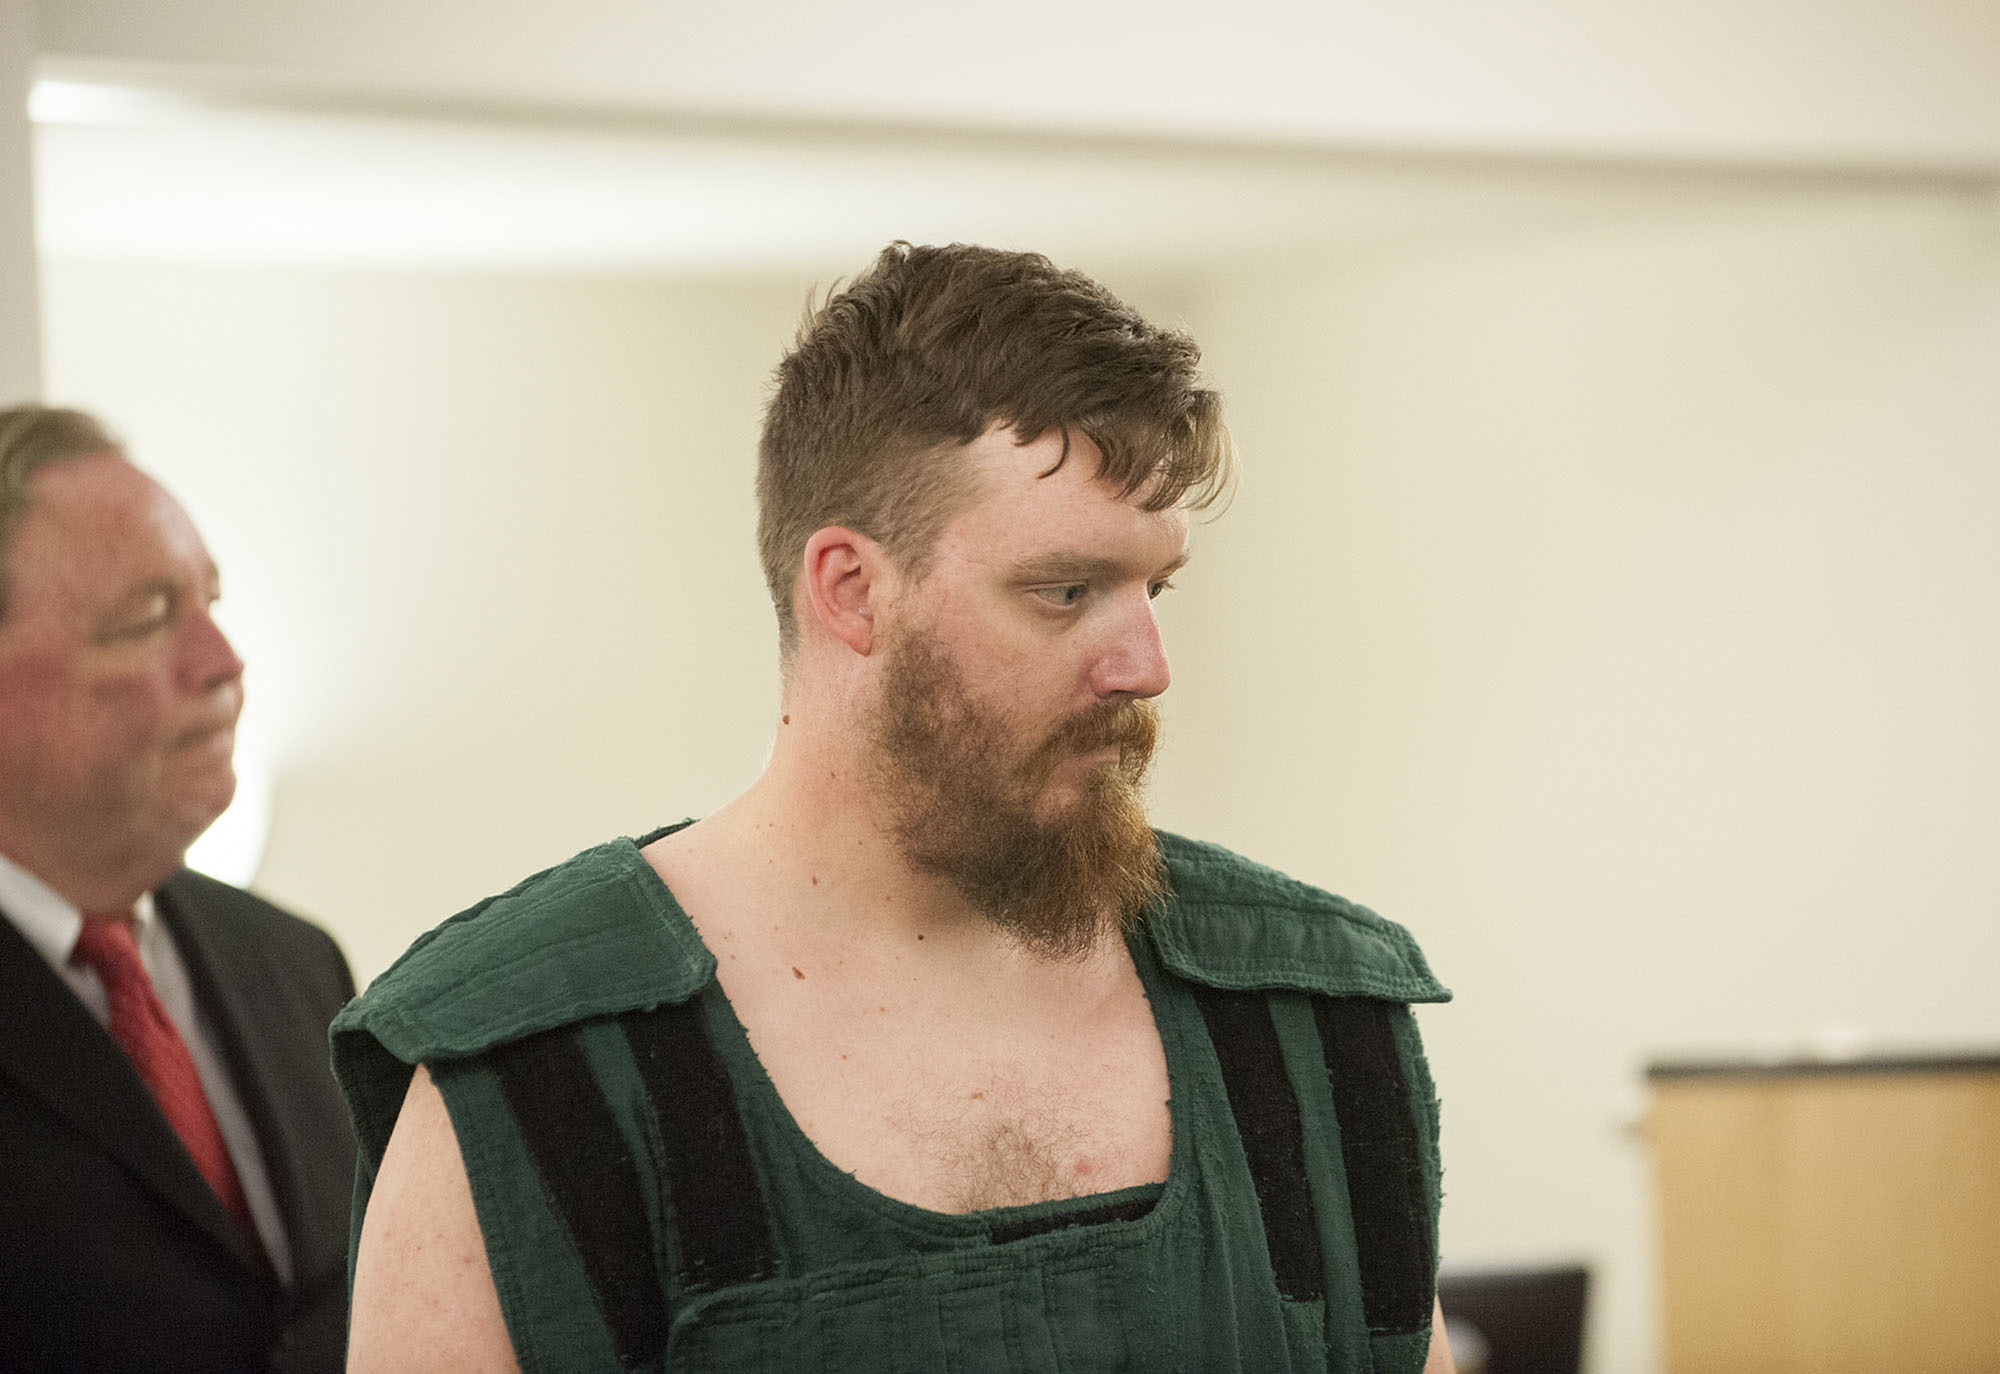 Todd Marjama Jr., who faces a murder charge in the death of his wife, appears June 30 in Clark County Superior Court. Marjama entered not-guilty pleas Thursday to first-degree murder and first-degree assault, both domestic violence-related crimes that involved a deadly weapon.